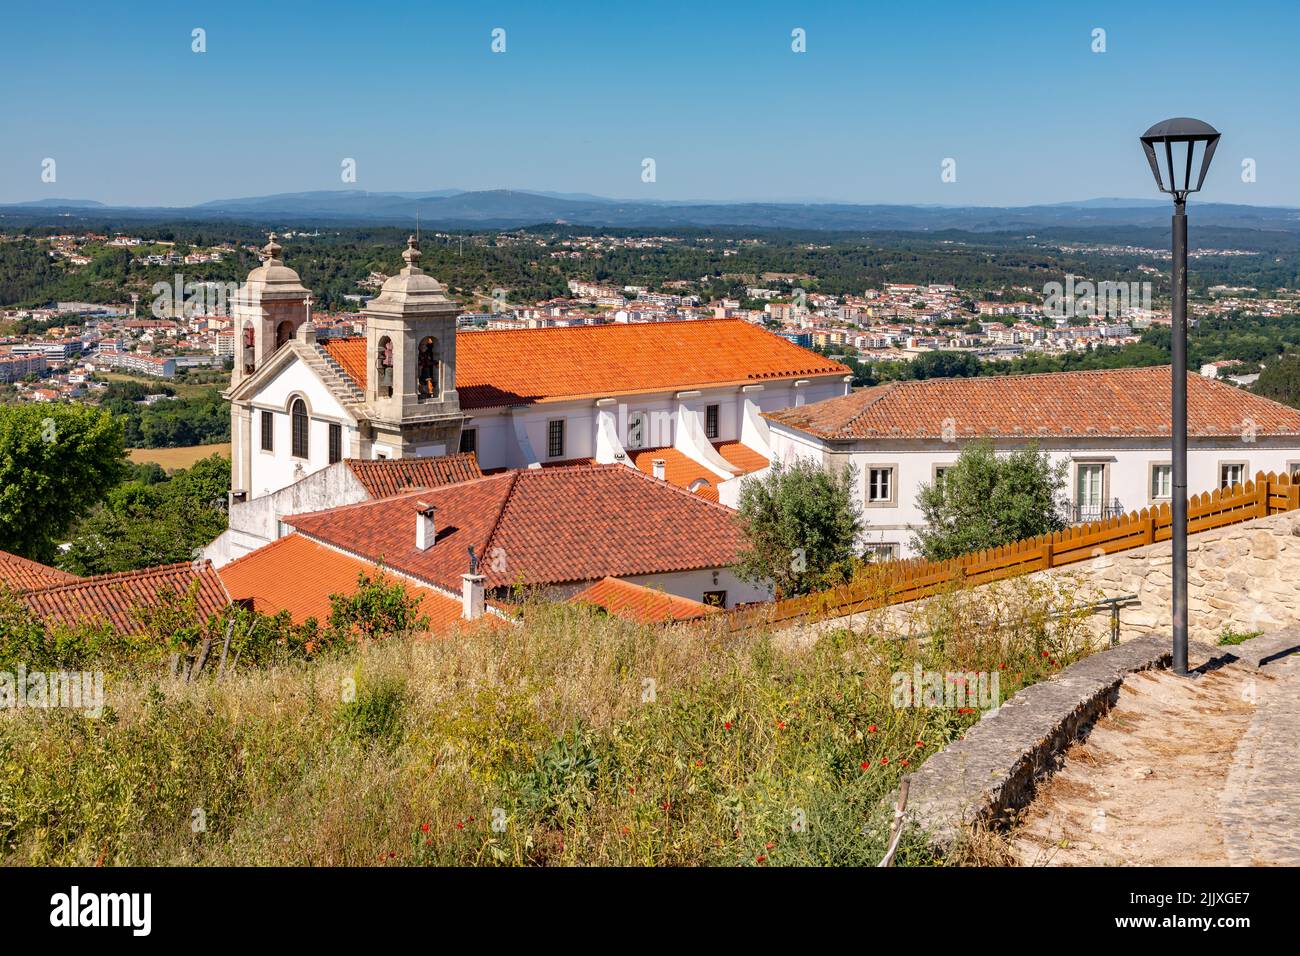 View of the Church of Nossa Senhora das Misericordias on the Ourem Castle viewpoint, Portugal Stock Photo